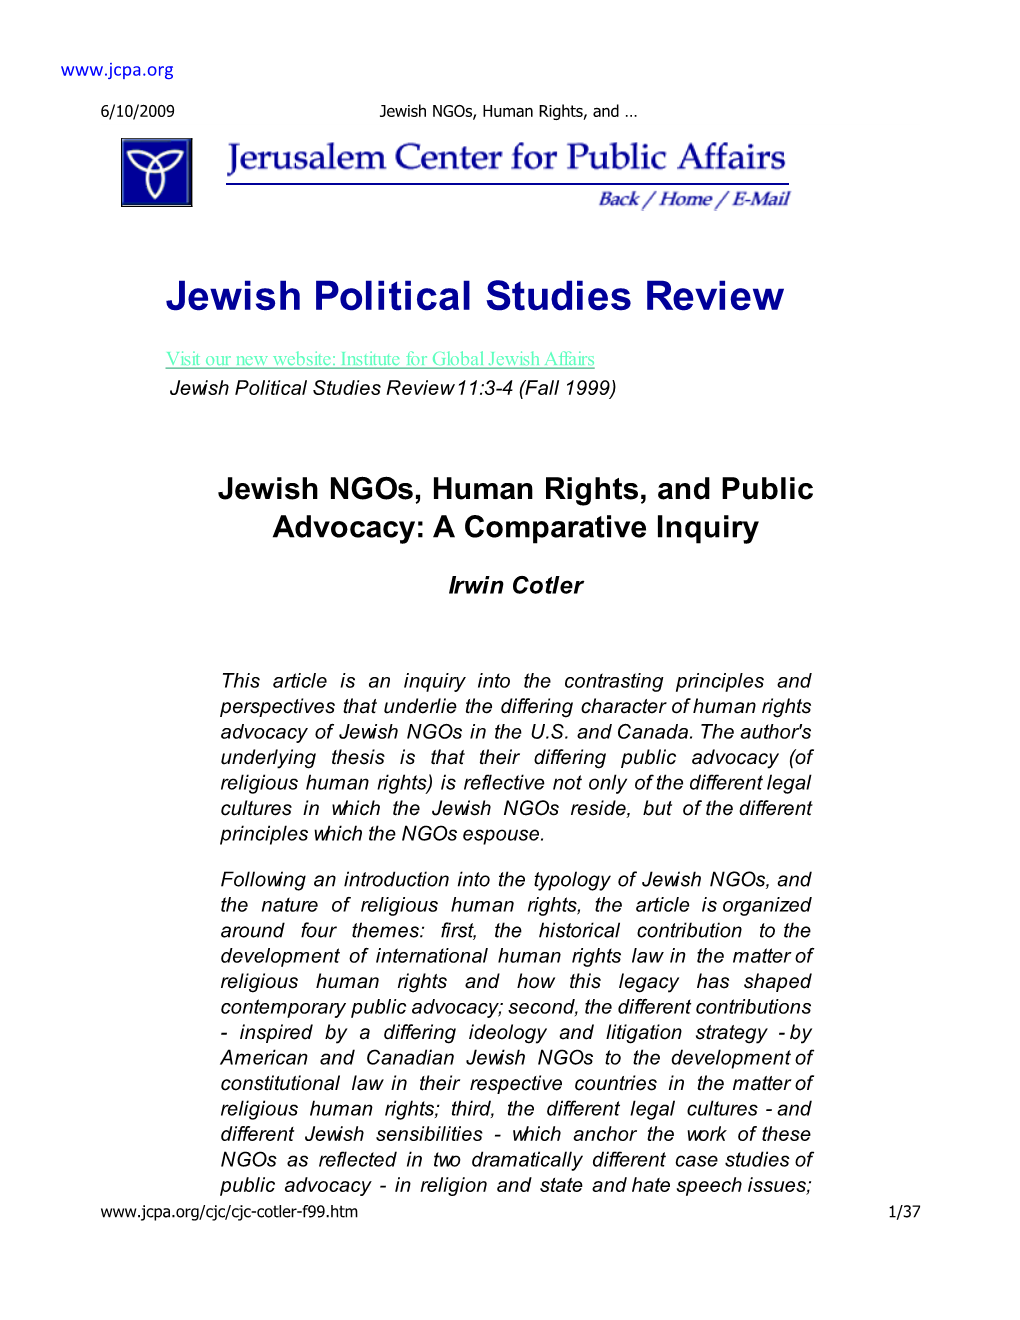 Jewish Ngos, Human Rights, and Public Advocacy: a Comparative Inquiry